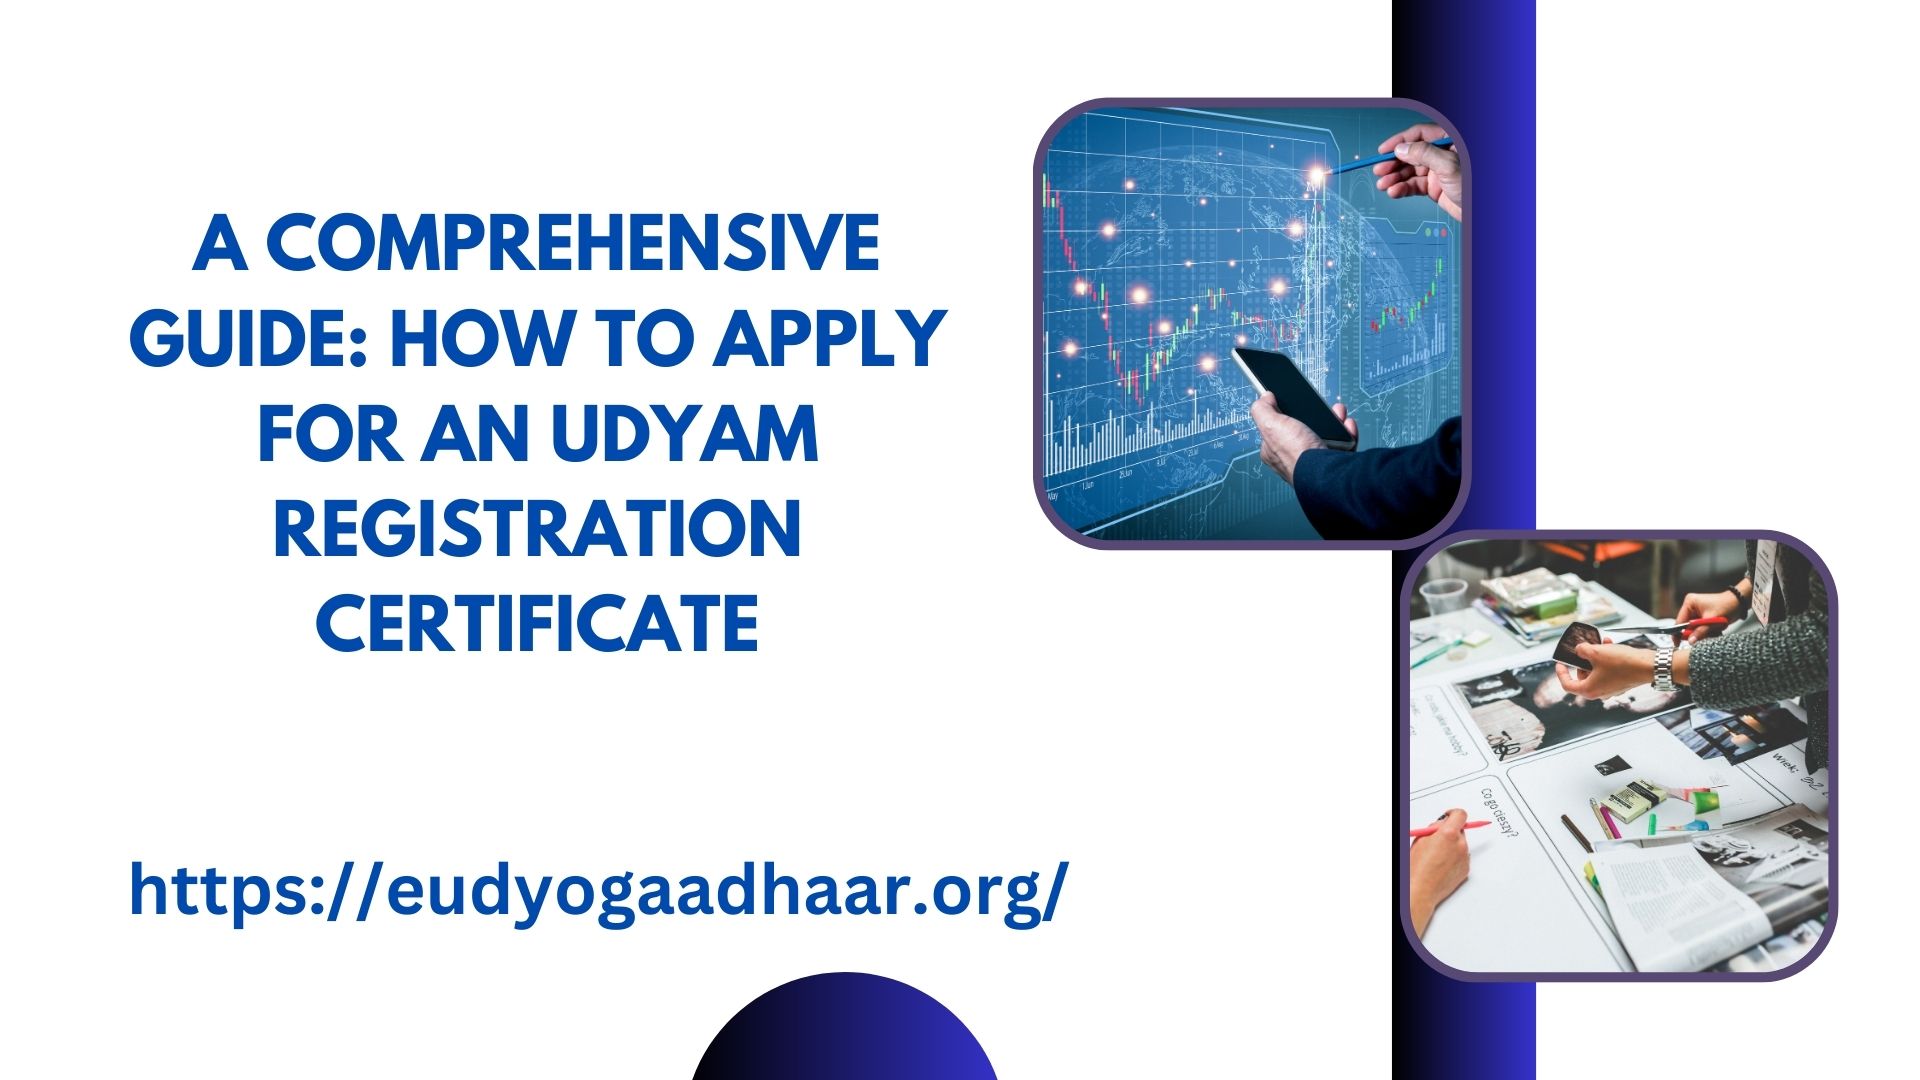 A Comprehensive Guide: How to Apply for an Udyam Registration Certificate